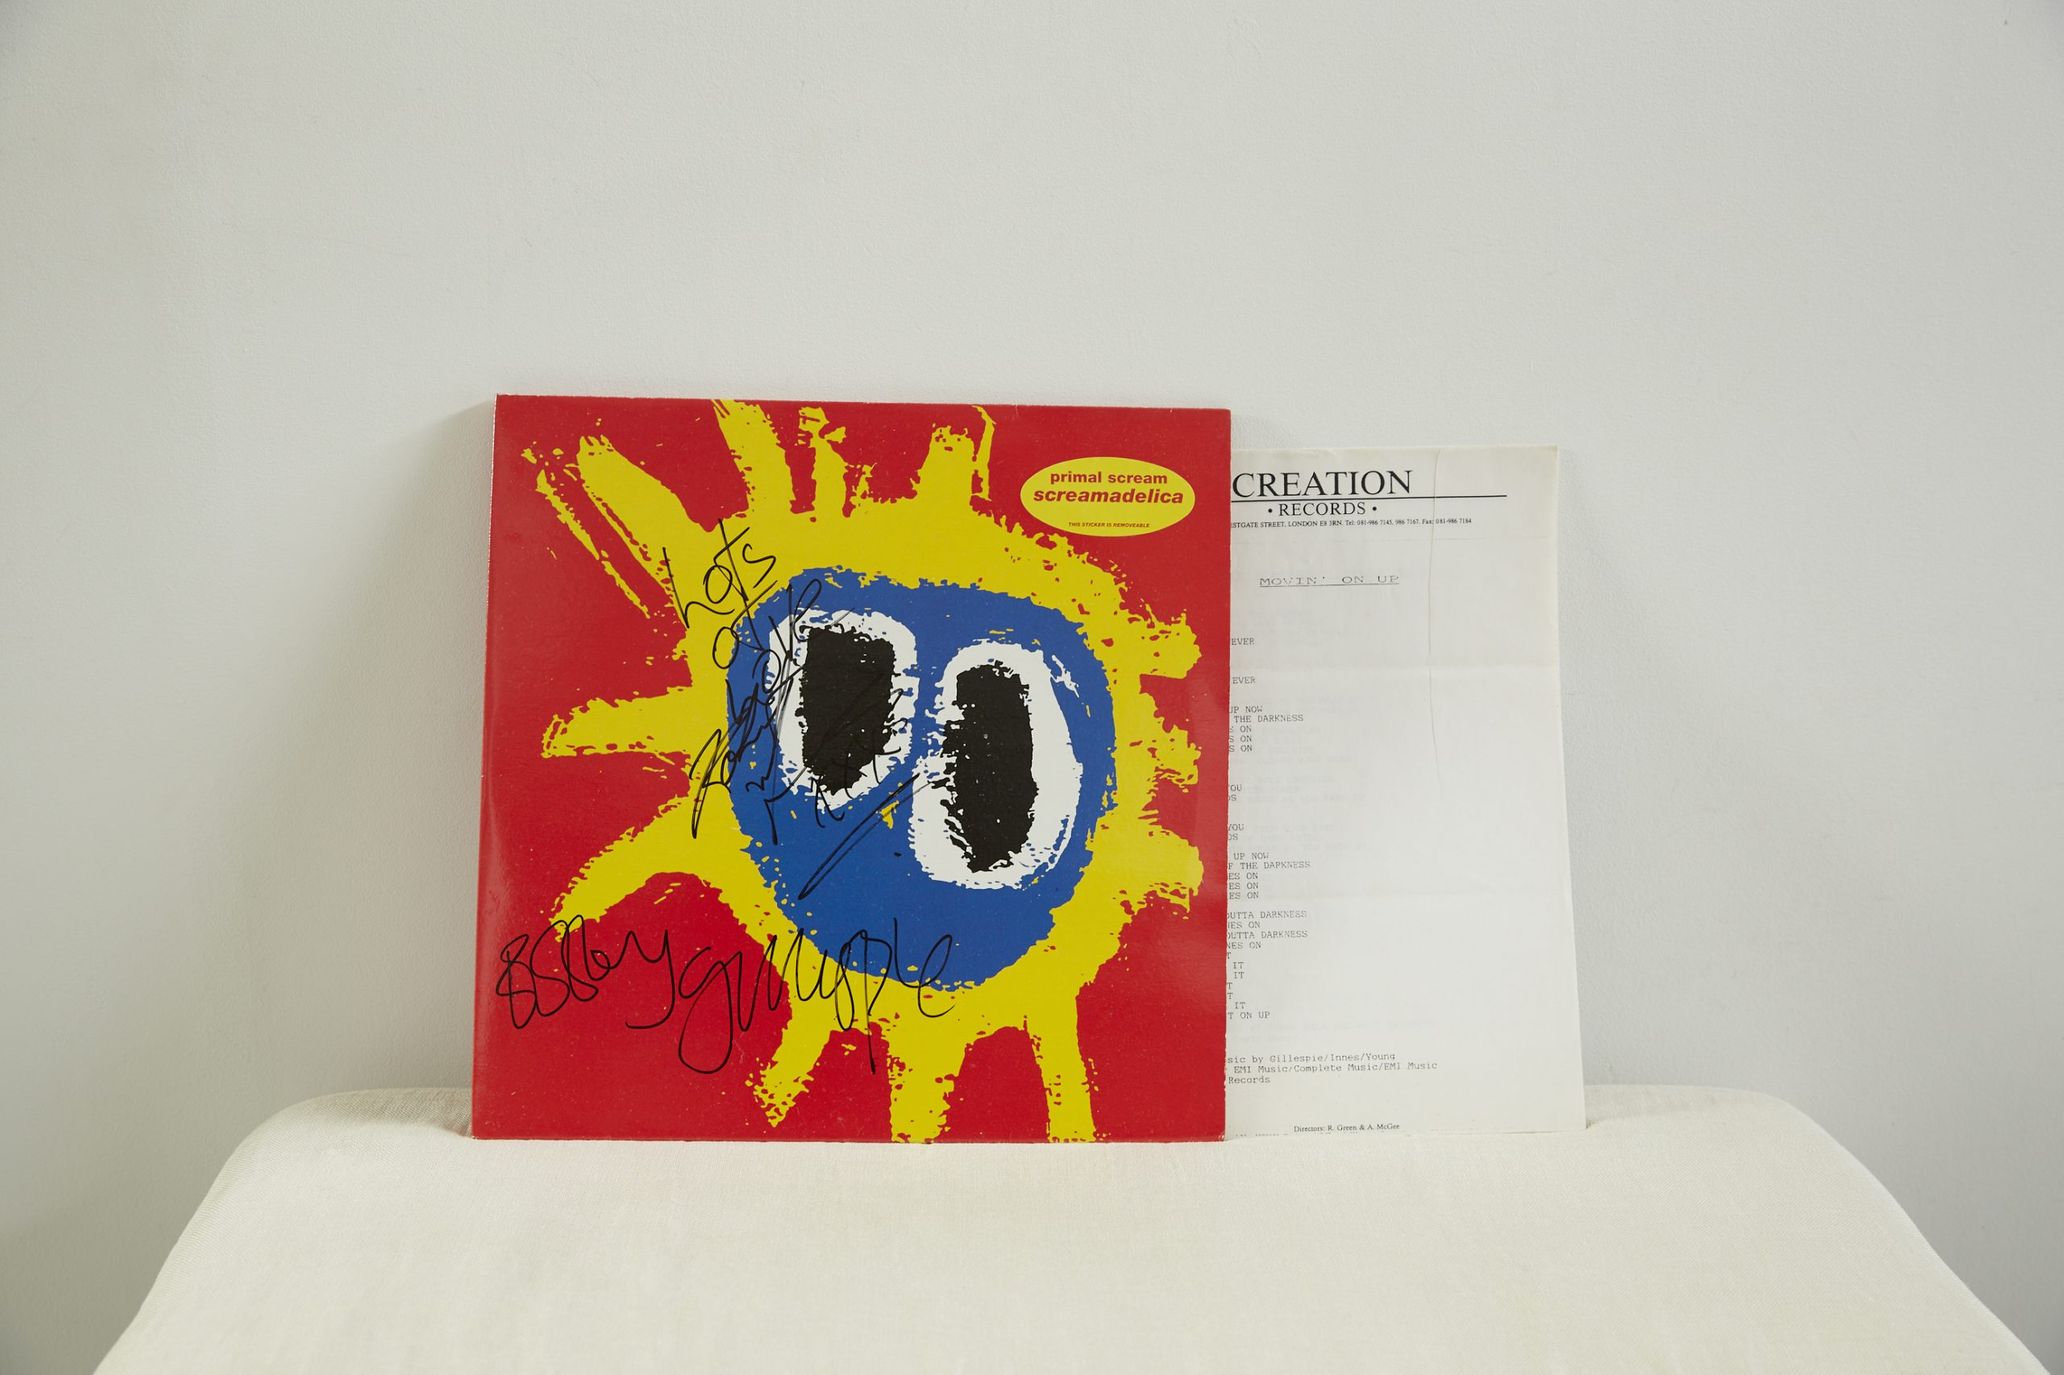 Screamadelica autographed by the members of the band, including Bobby Gillespie